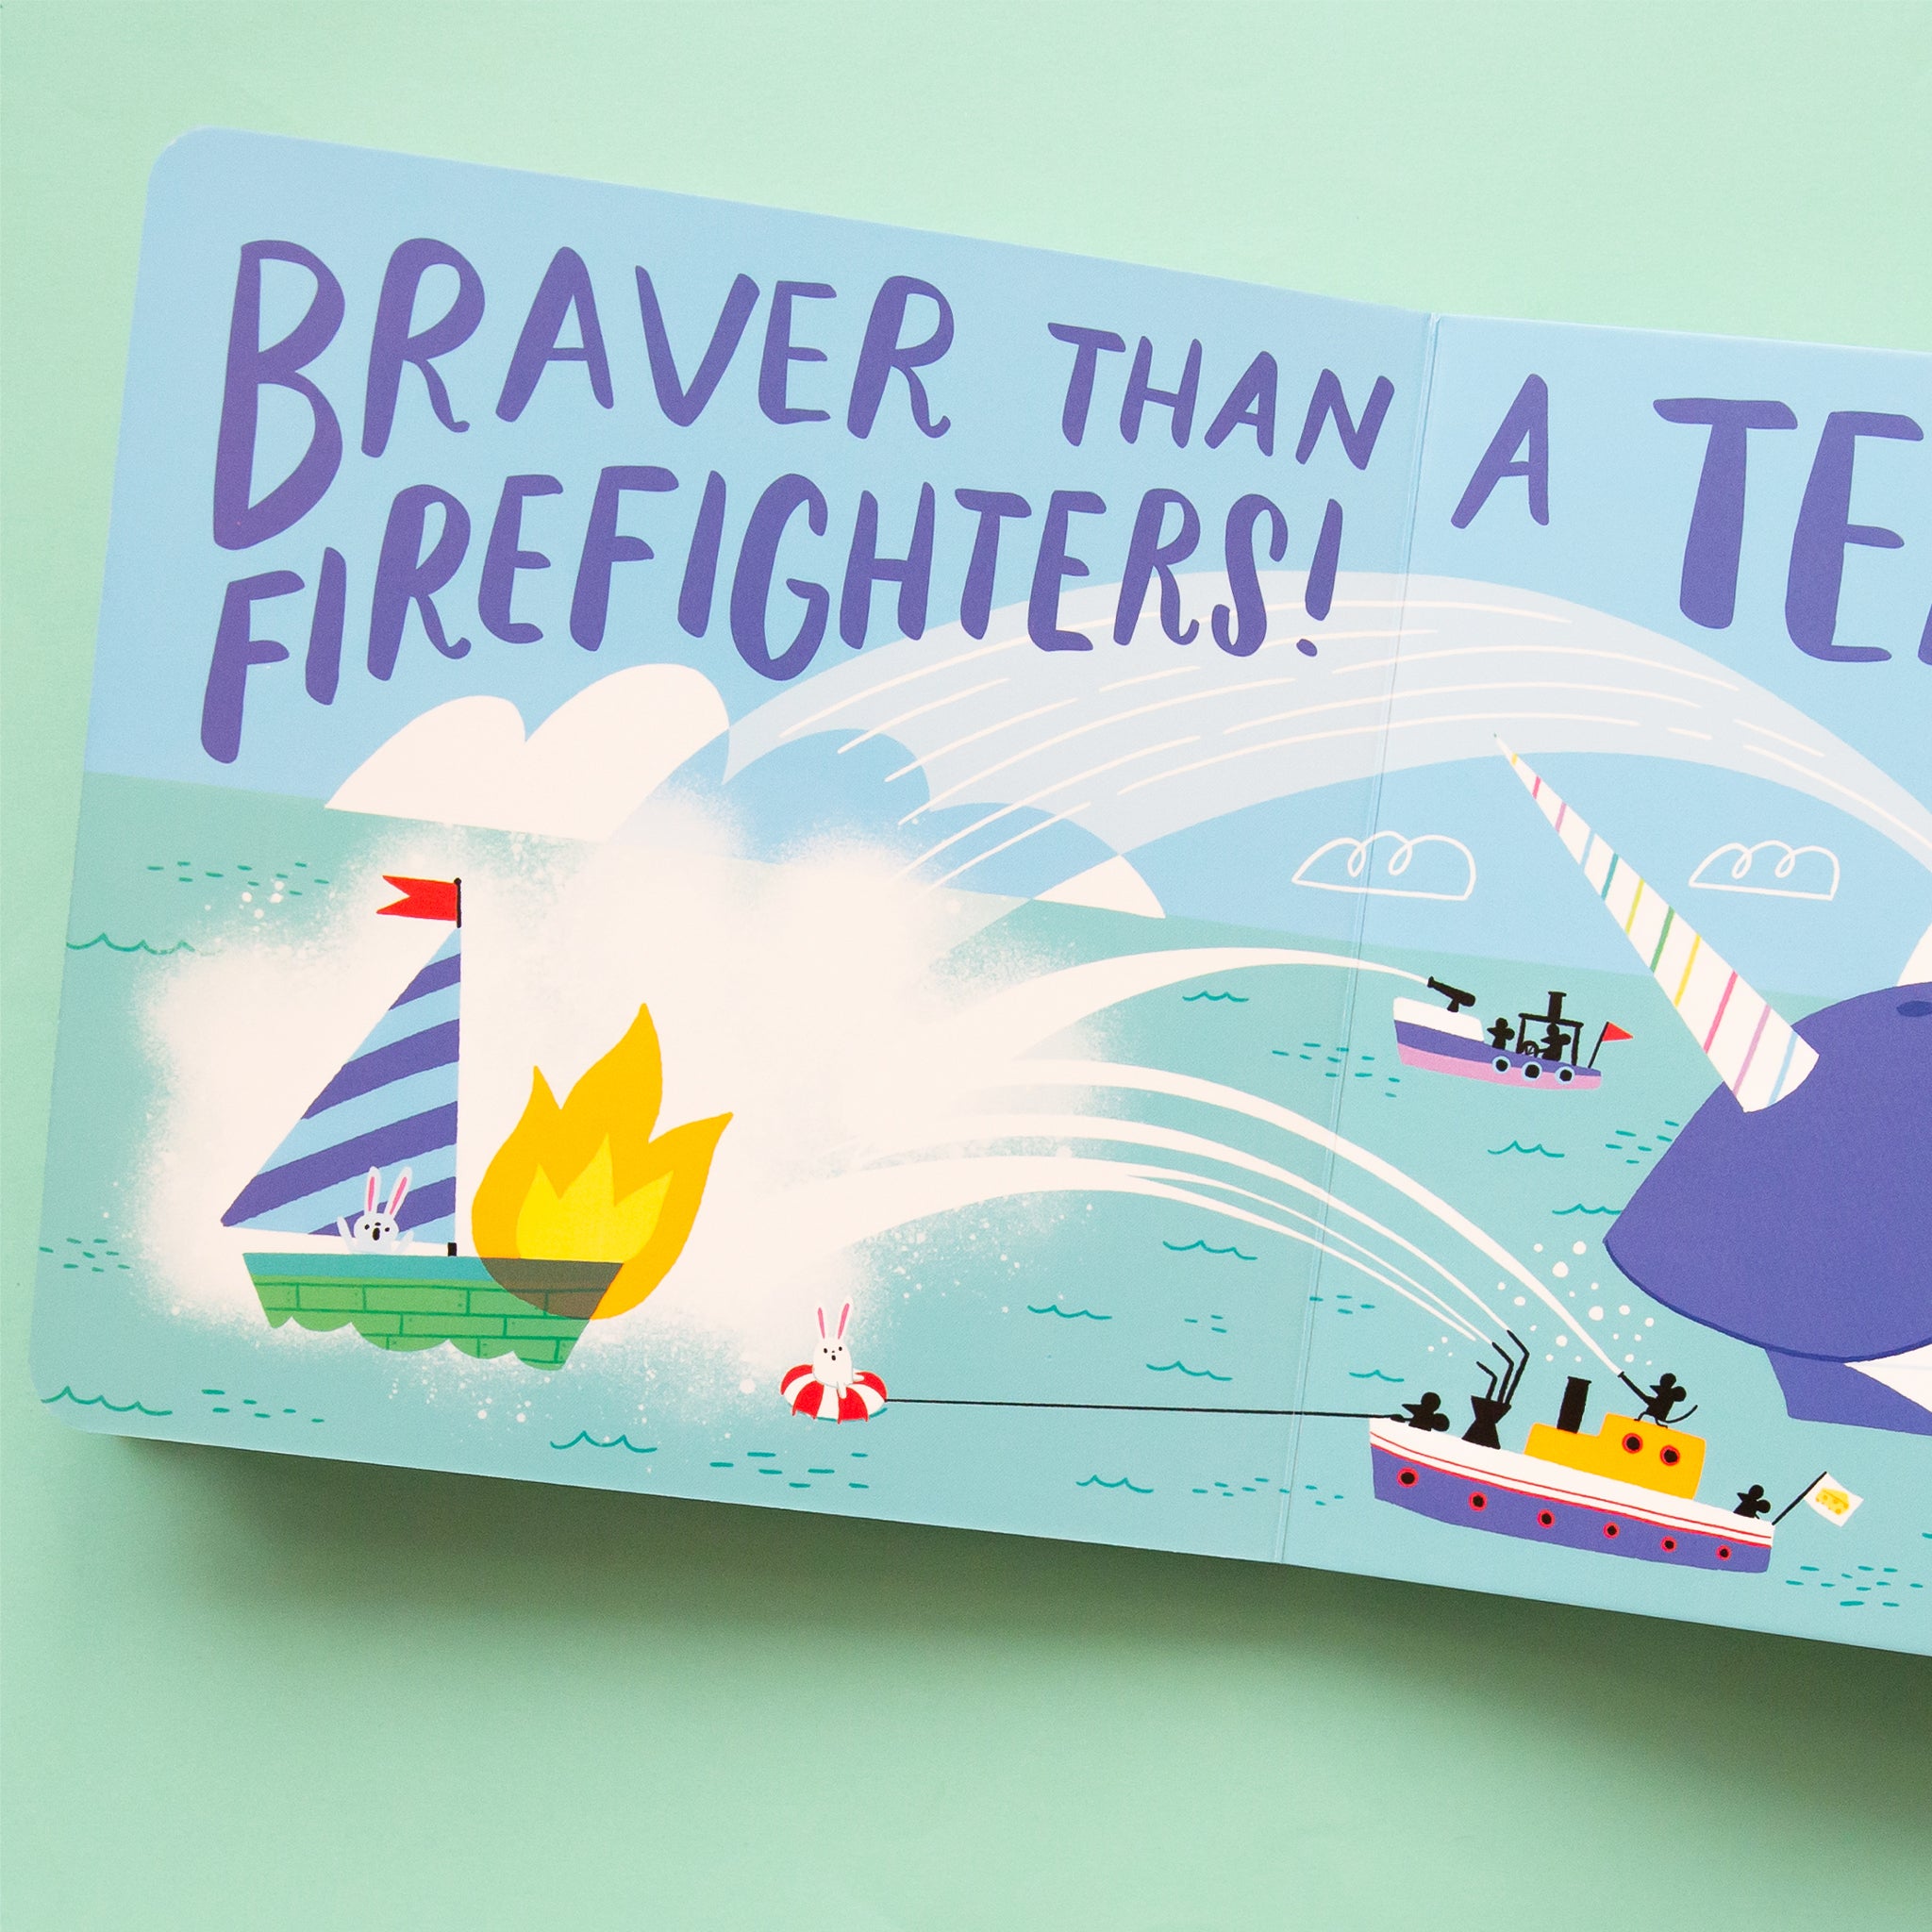 The blue book opened to a page with an illustration that reads, "Braver Than A Team of Firefighters!". 